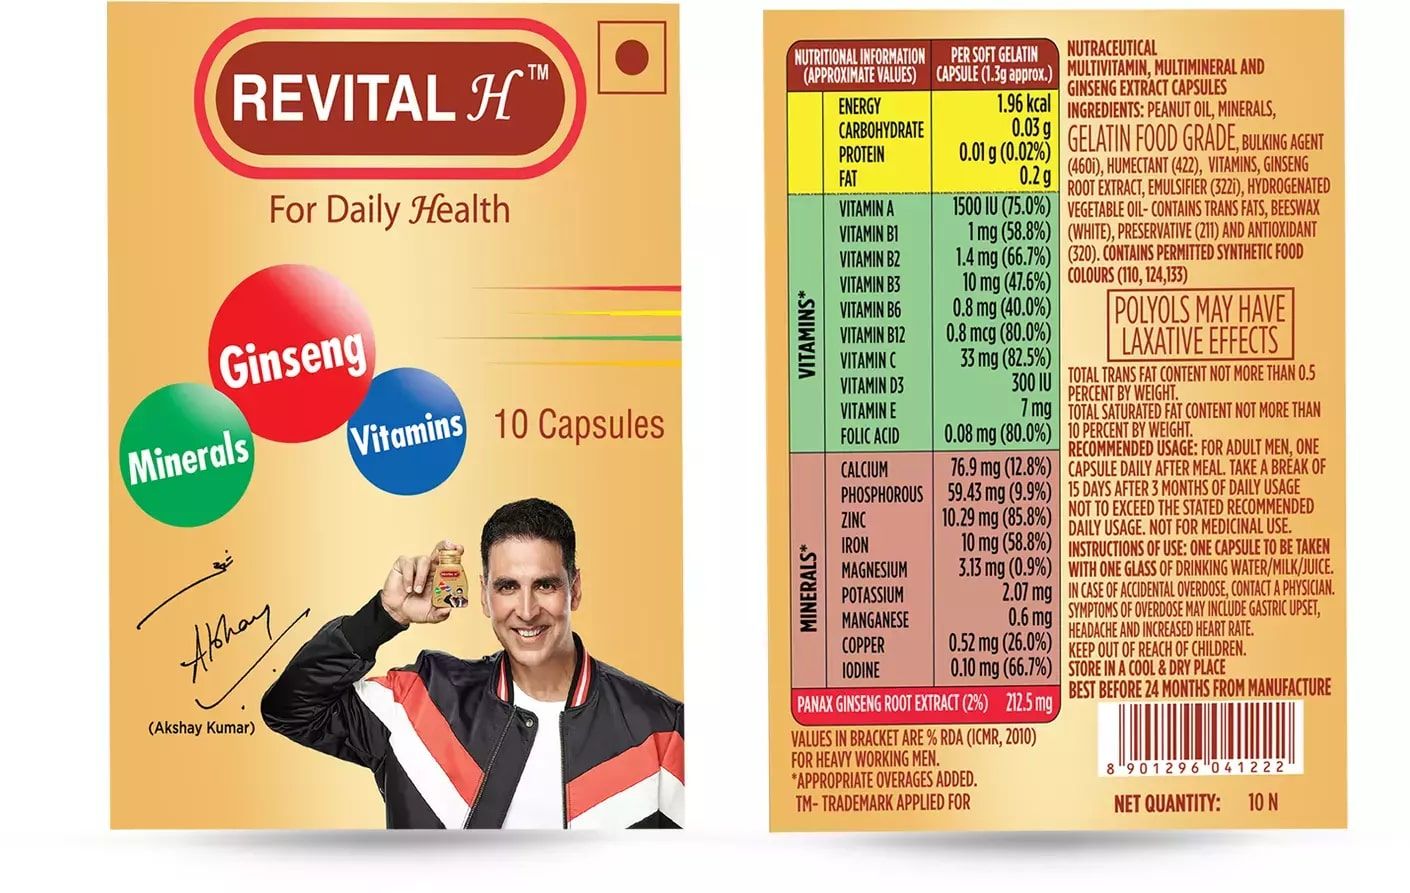 Revital H Multivitamin for Daily Health, 10 Capsules, Pack of 10 S